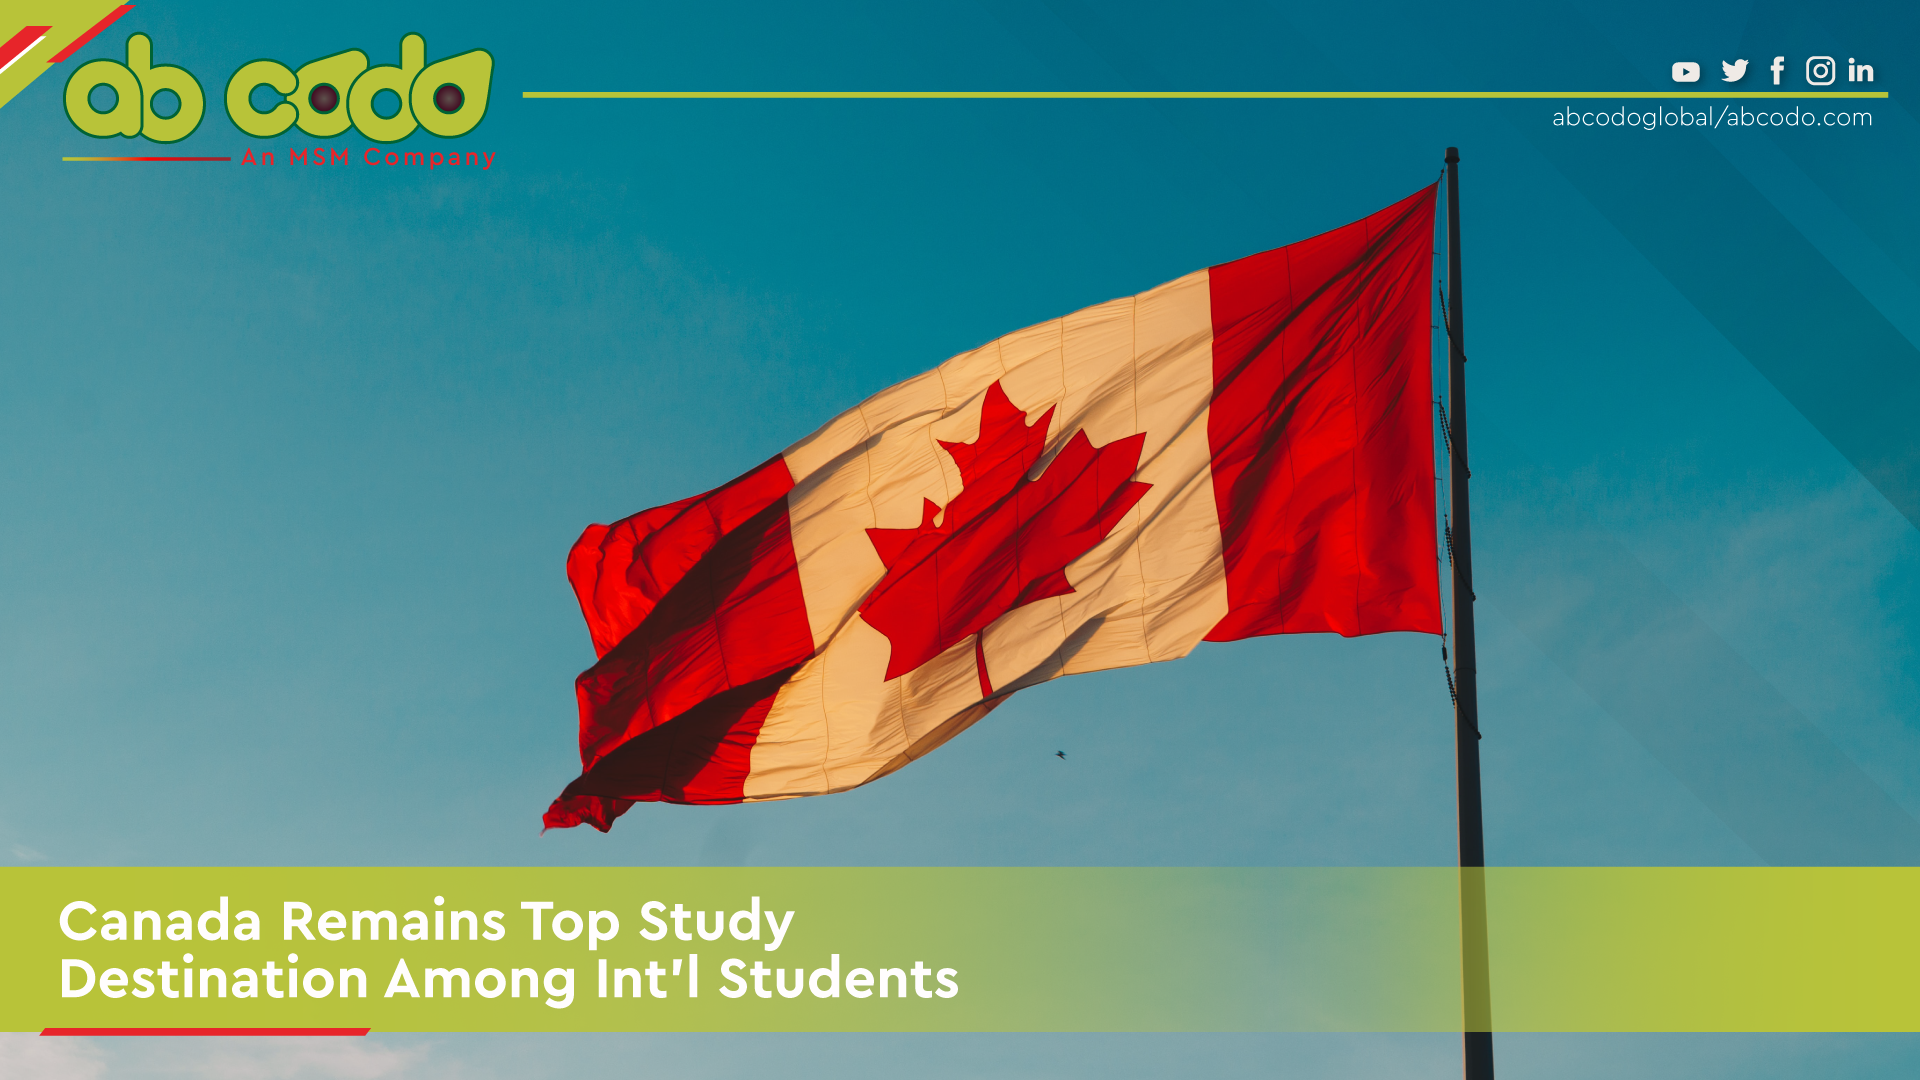 Canada Remains Top Study Destination Among Int’l Students